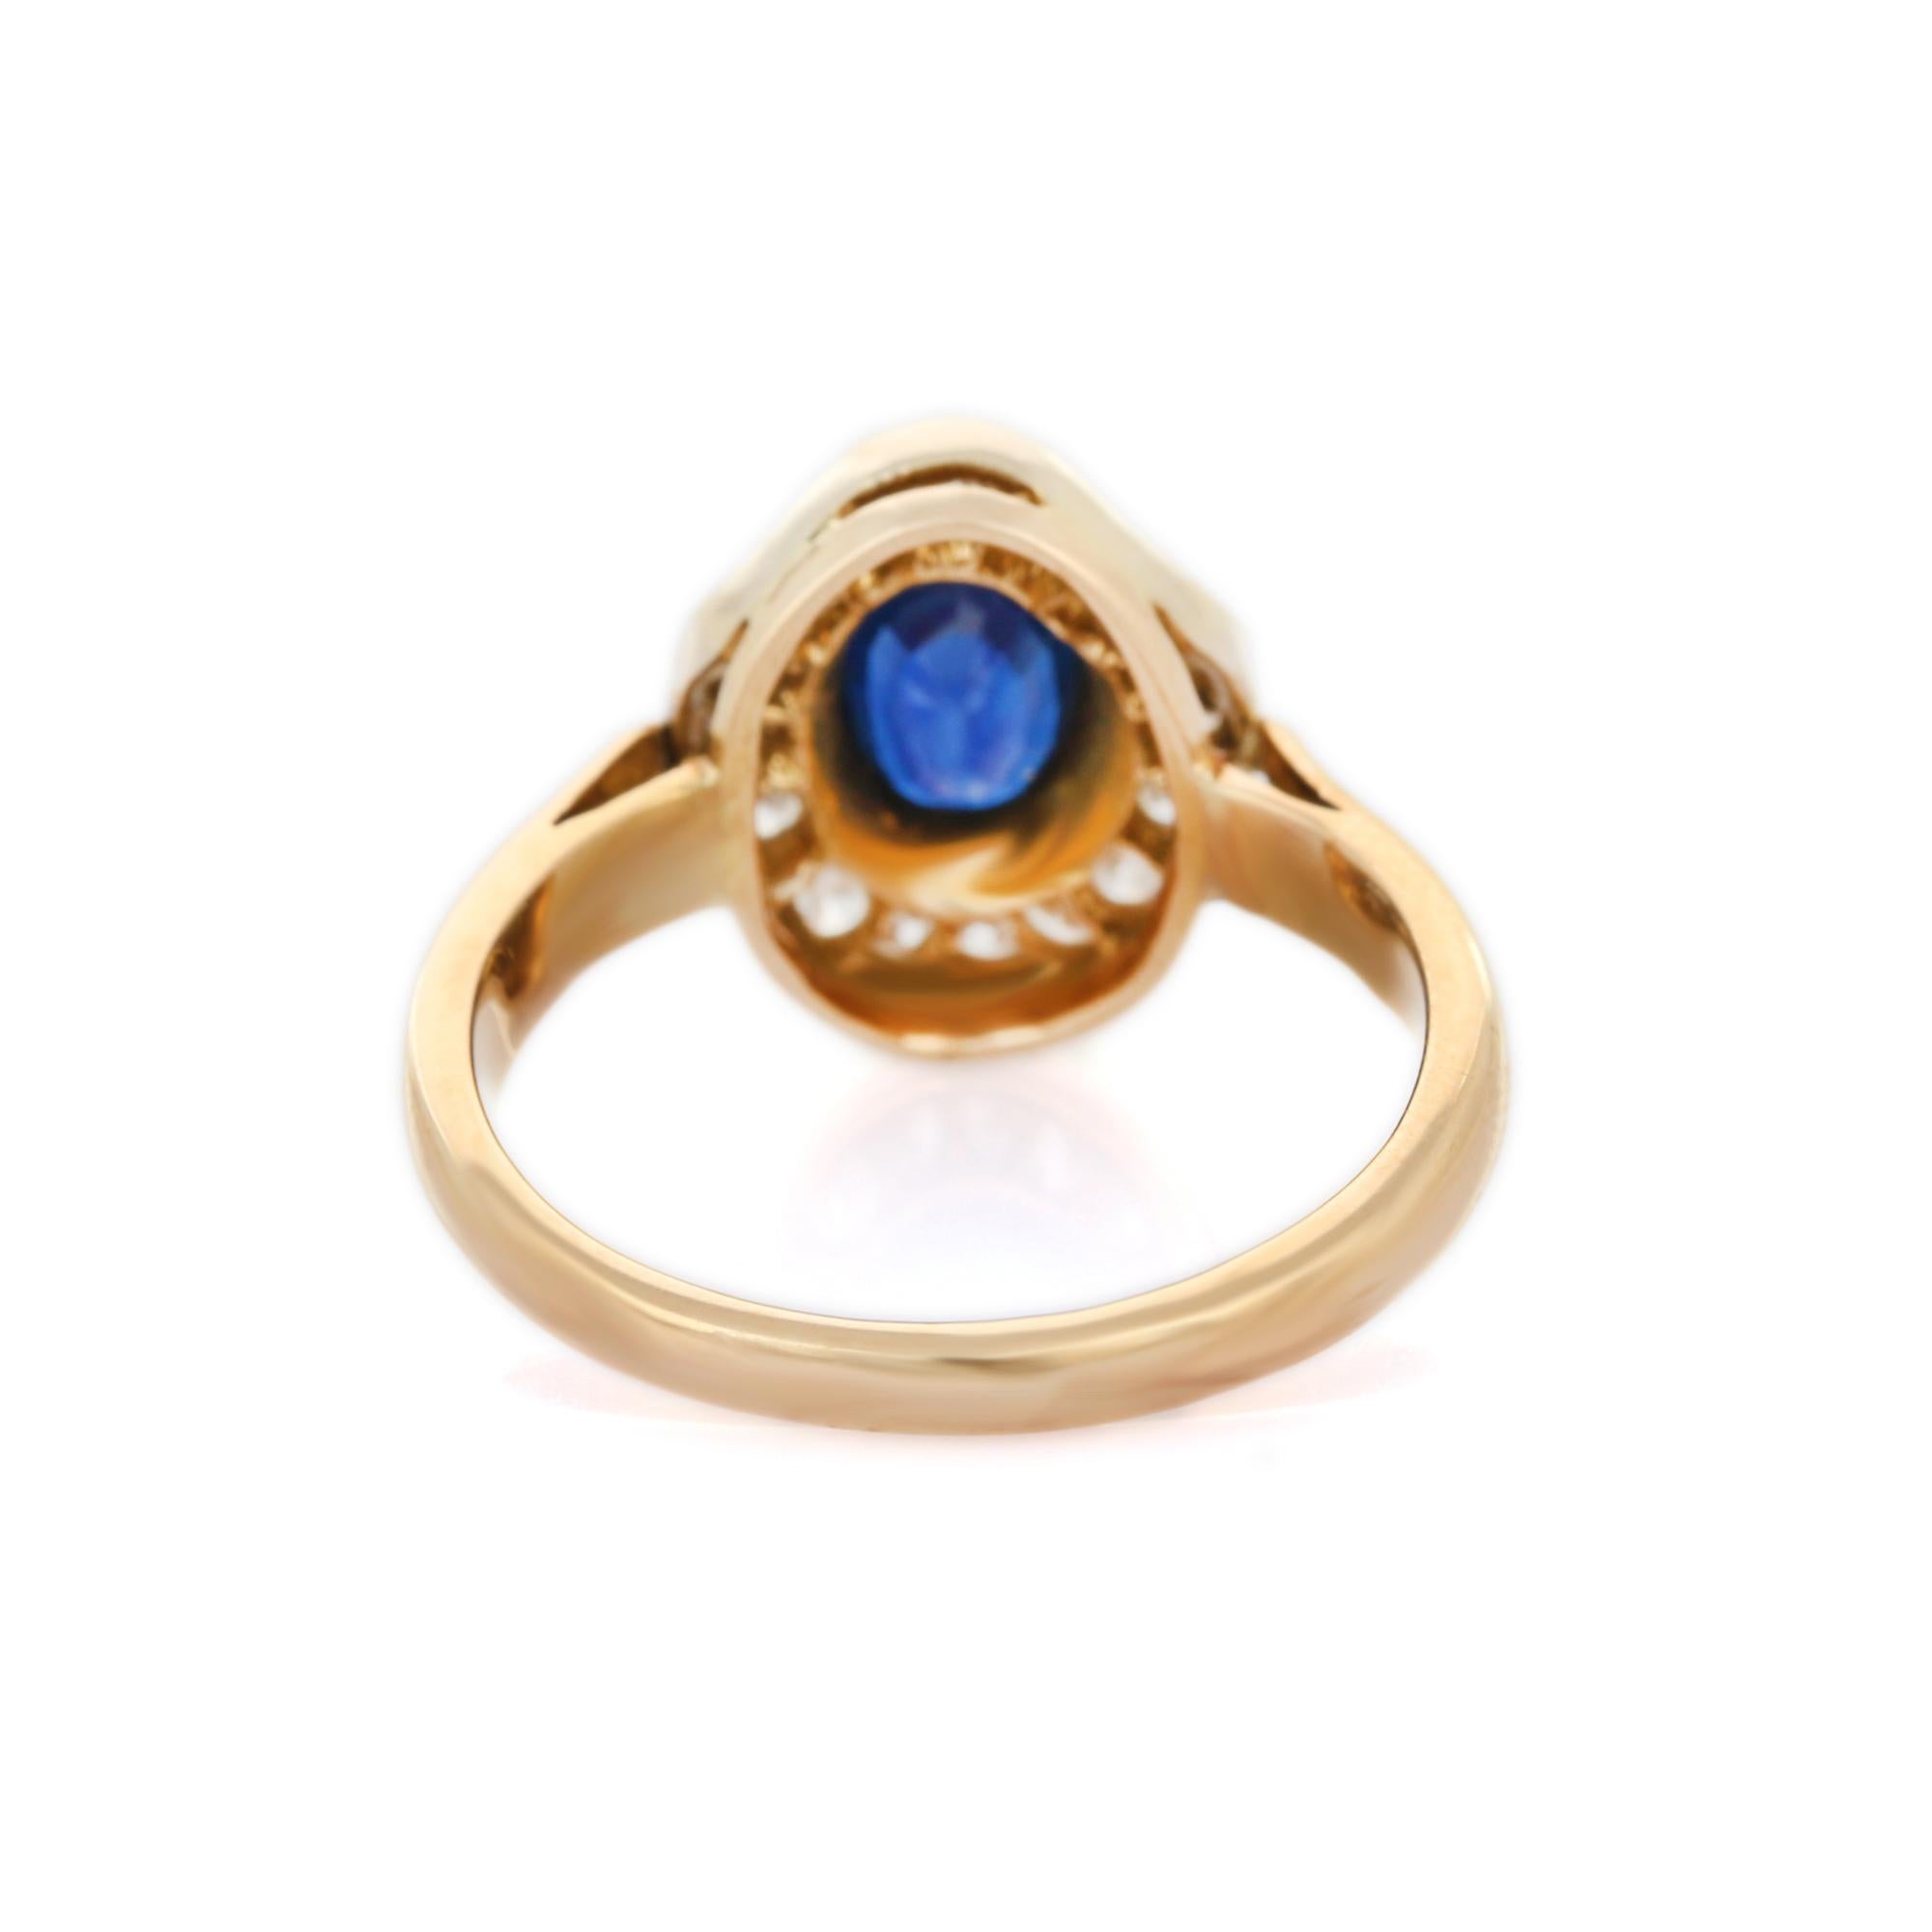 For Sale:  Alluring 18K Solid Yellow Gold Blue Sapphire Diamond Ring, Yellow Gold Ring 4